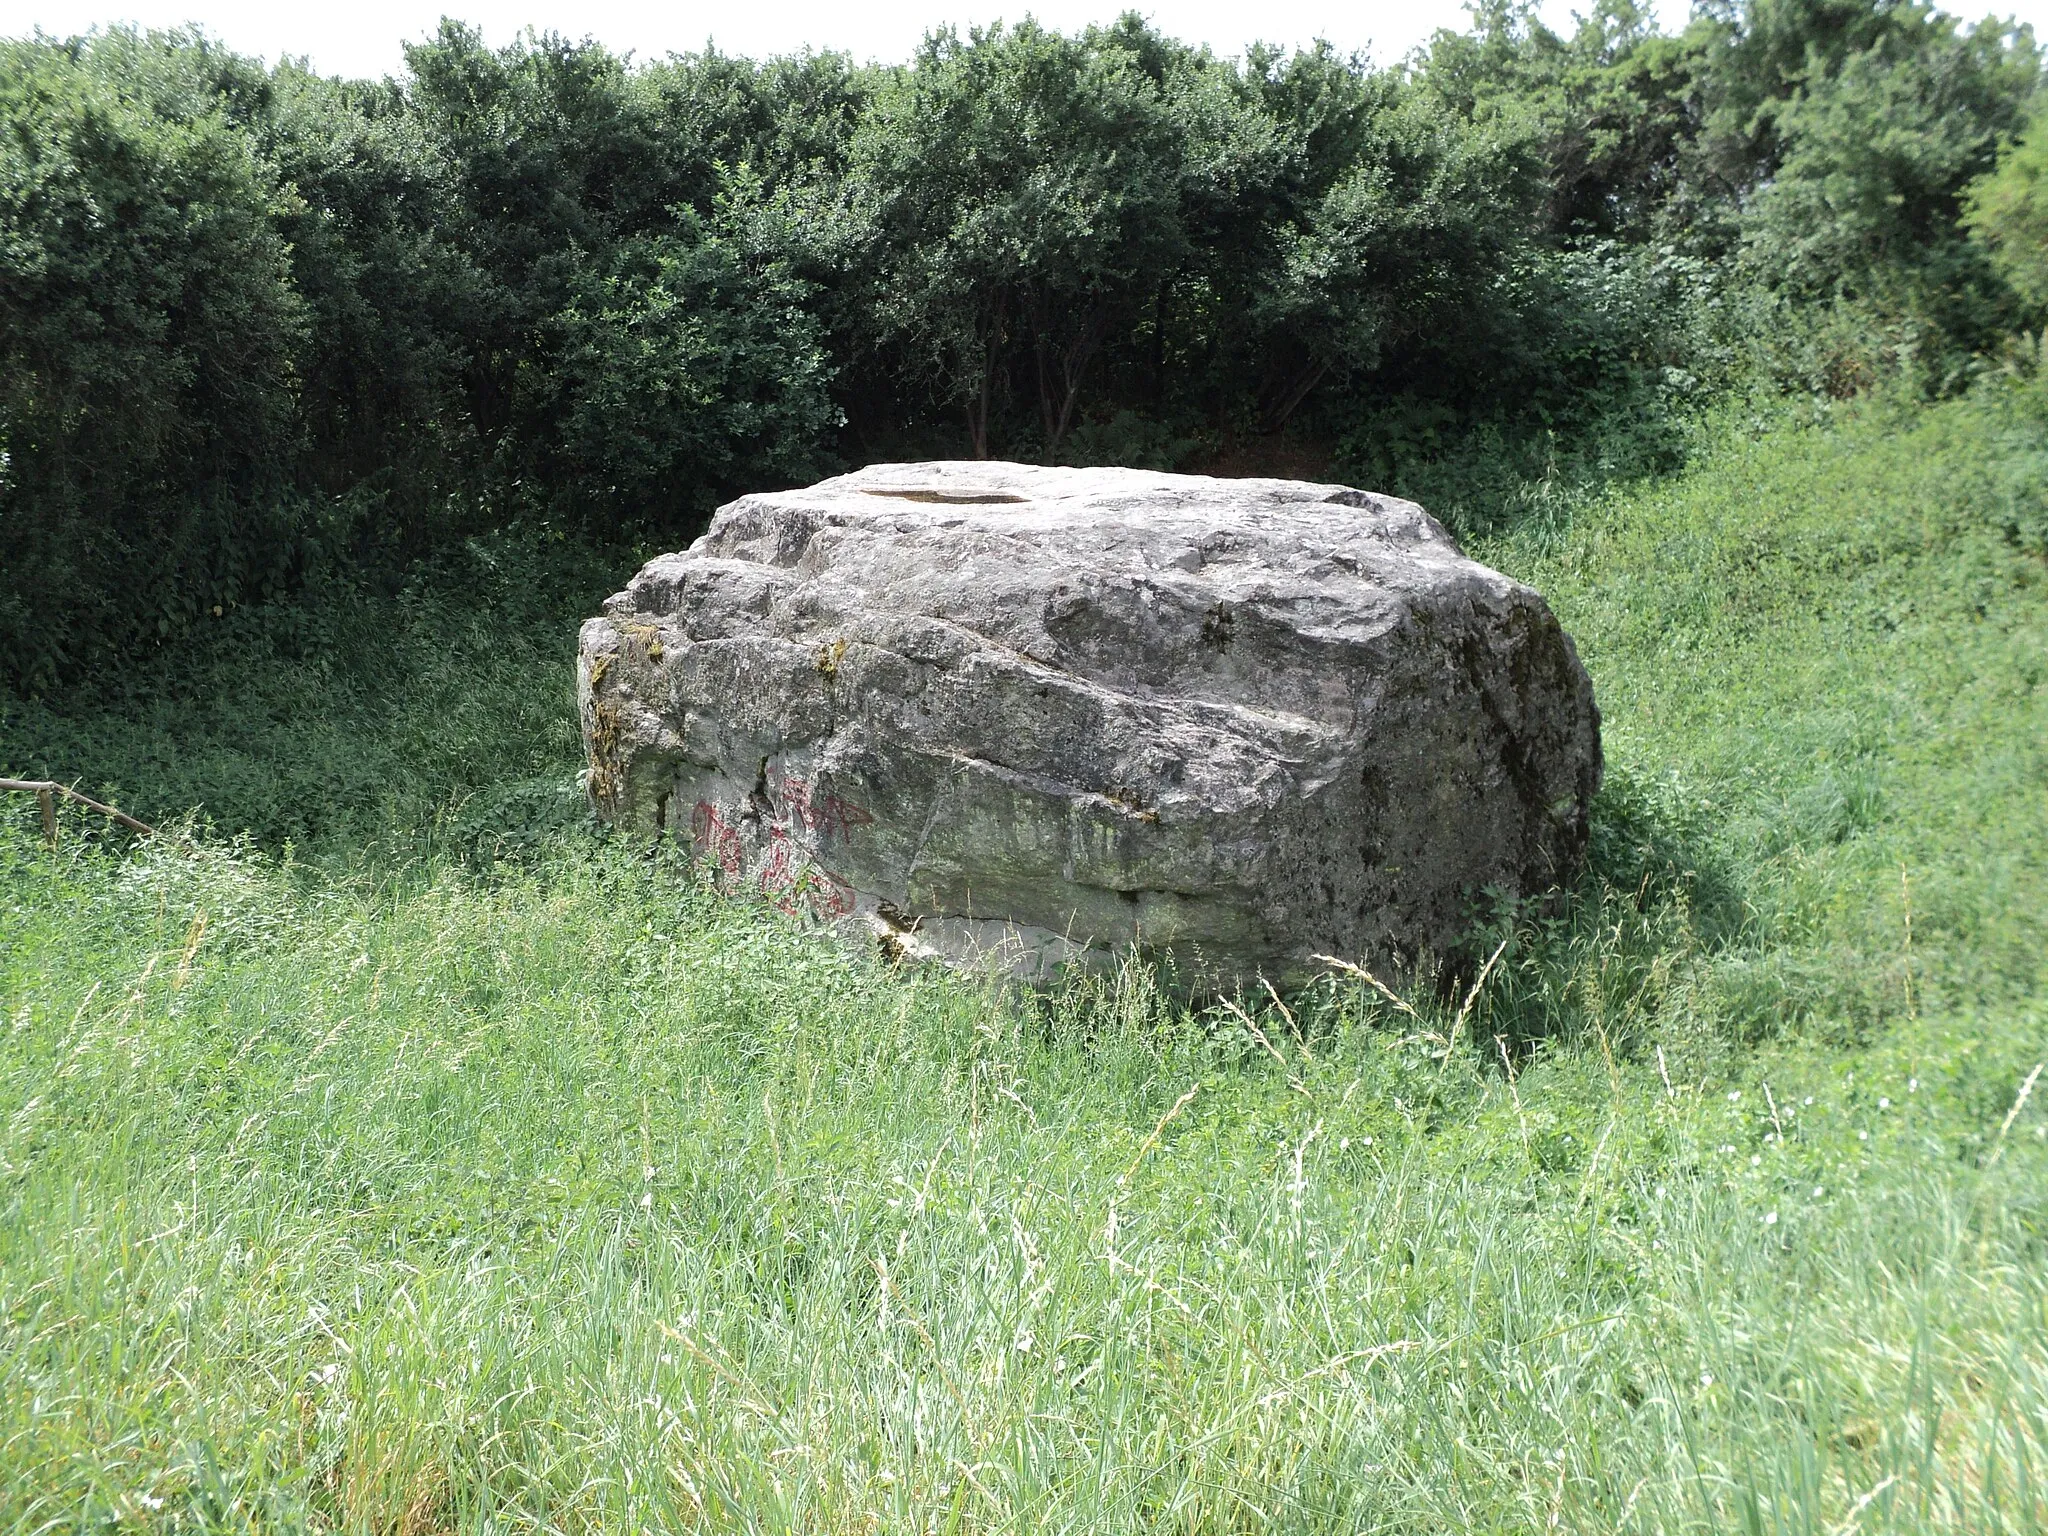 Photo showing: The "Groote stone" in Blankenhof, a relic from the Ice Age. 42 m³ volume, weight 70 tons